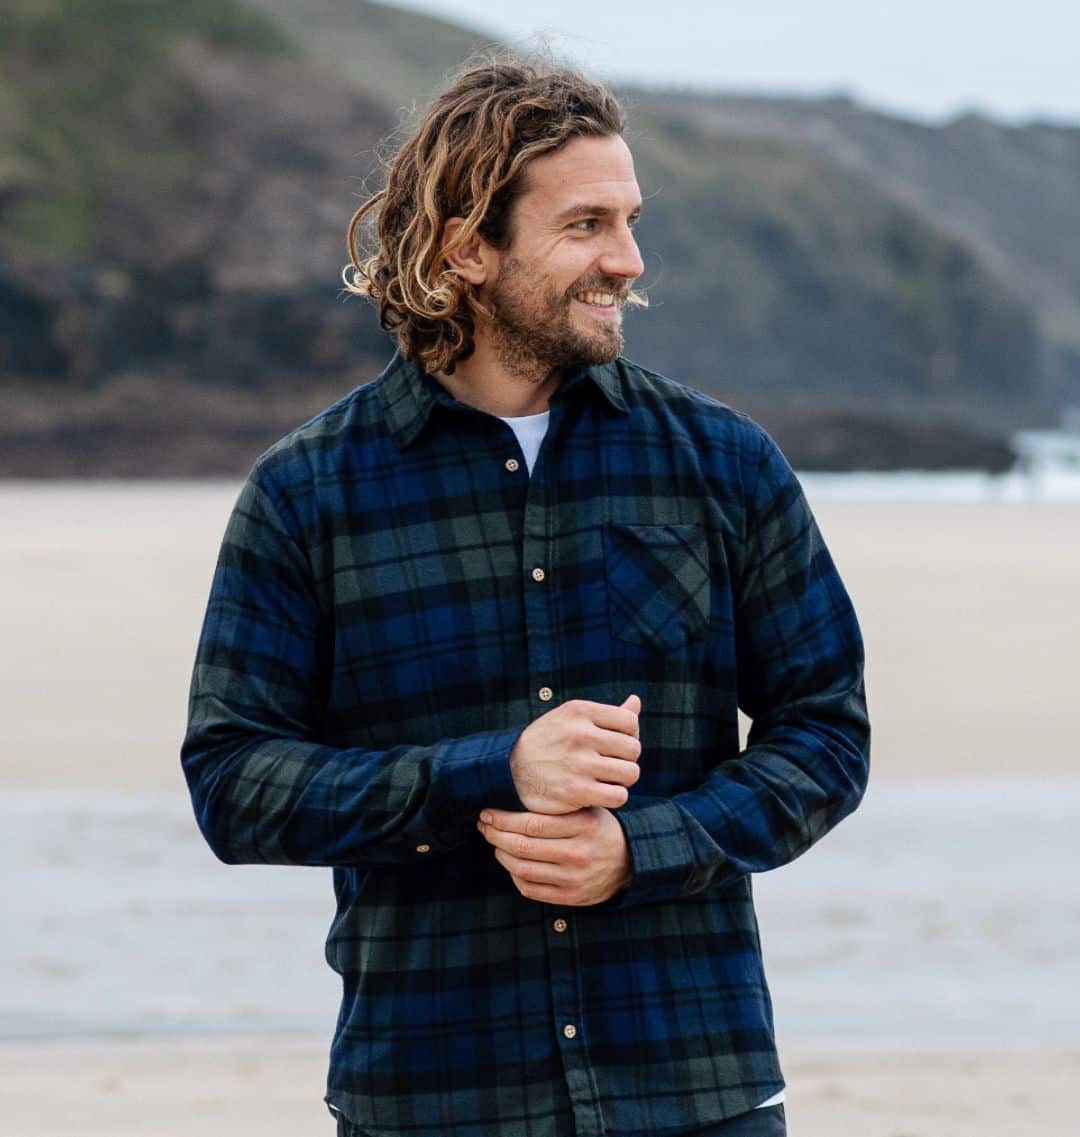 Flannel Shirts - What is their origin and are they still in style?